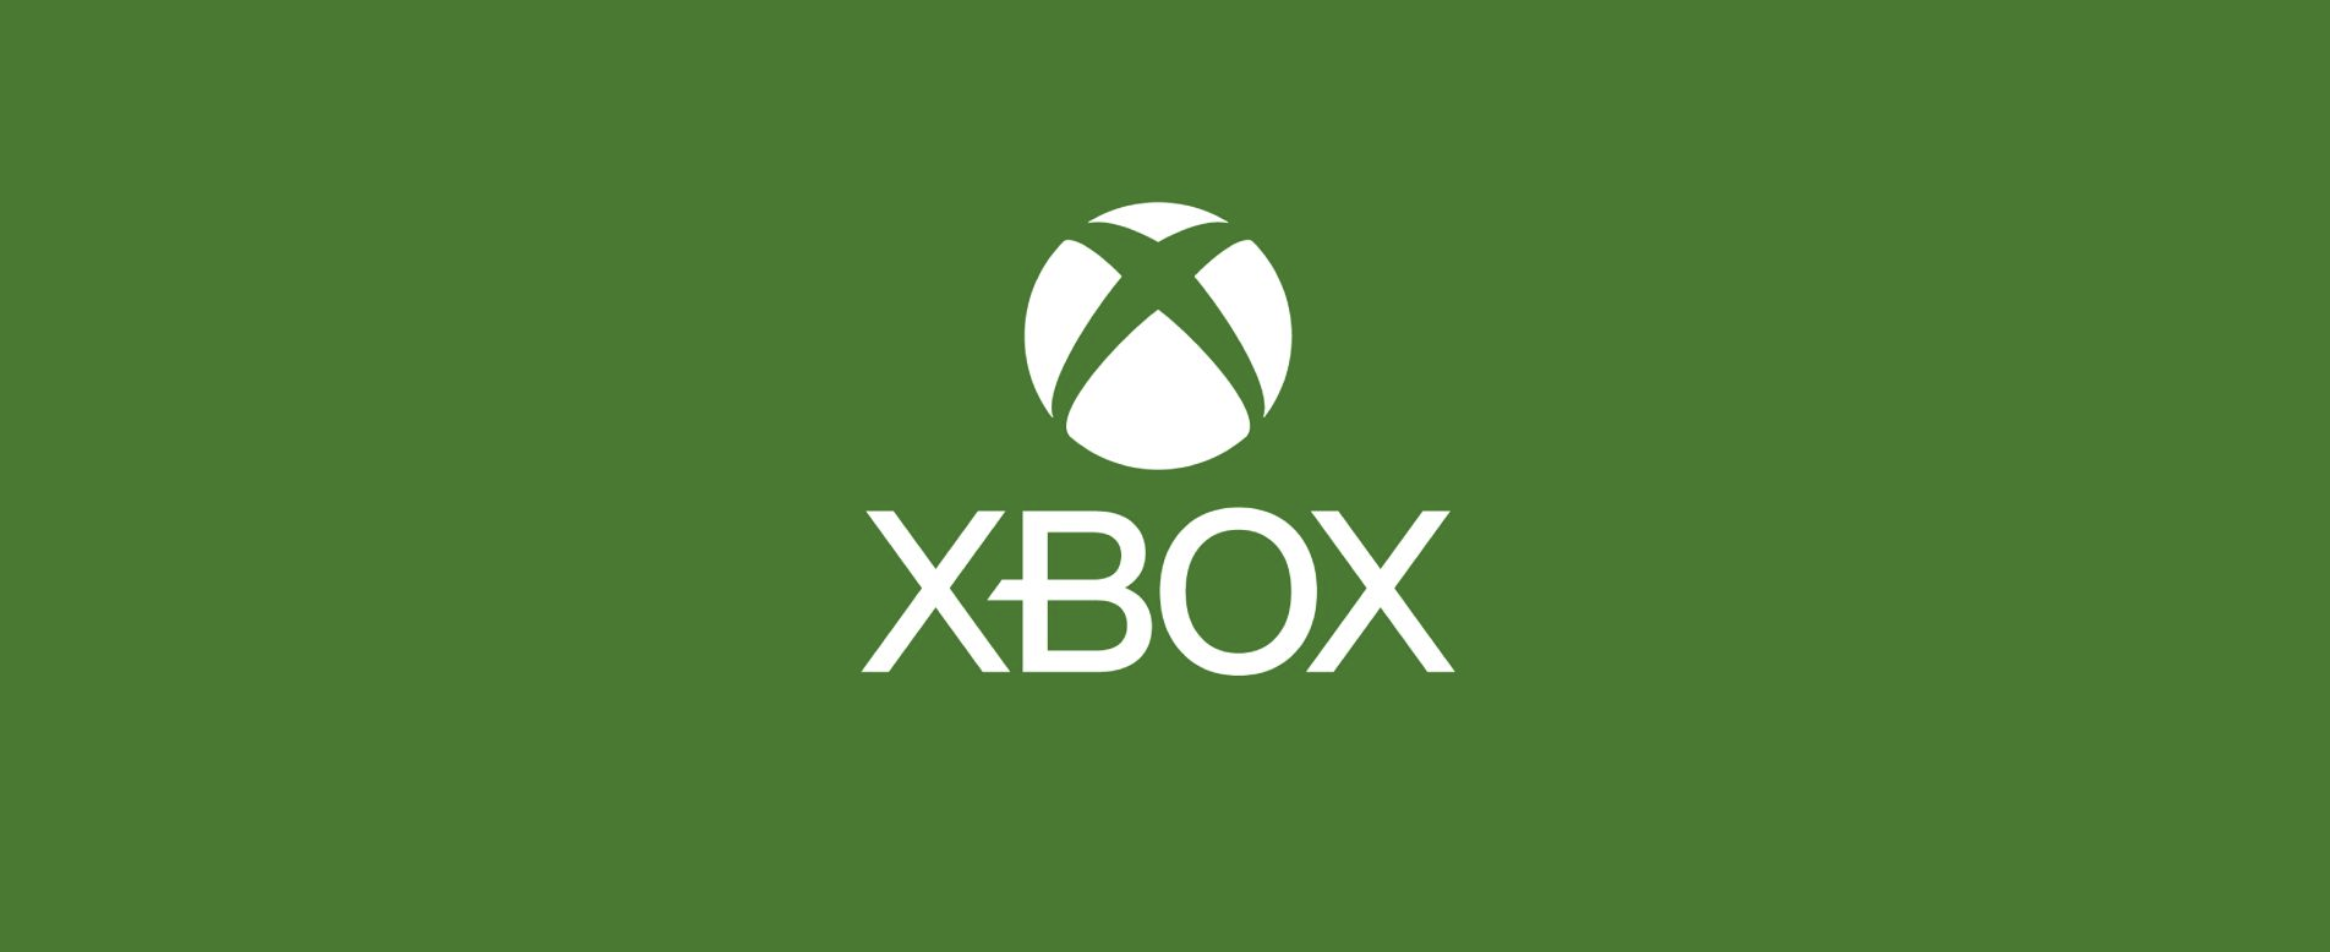 The Xbox logo: a green x on a white circle, with the word "XBOX" in white beneath it, on a green background